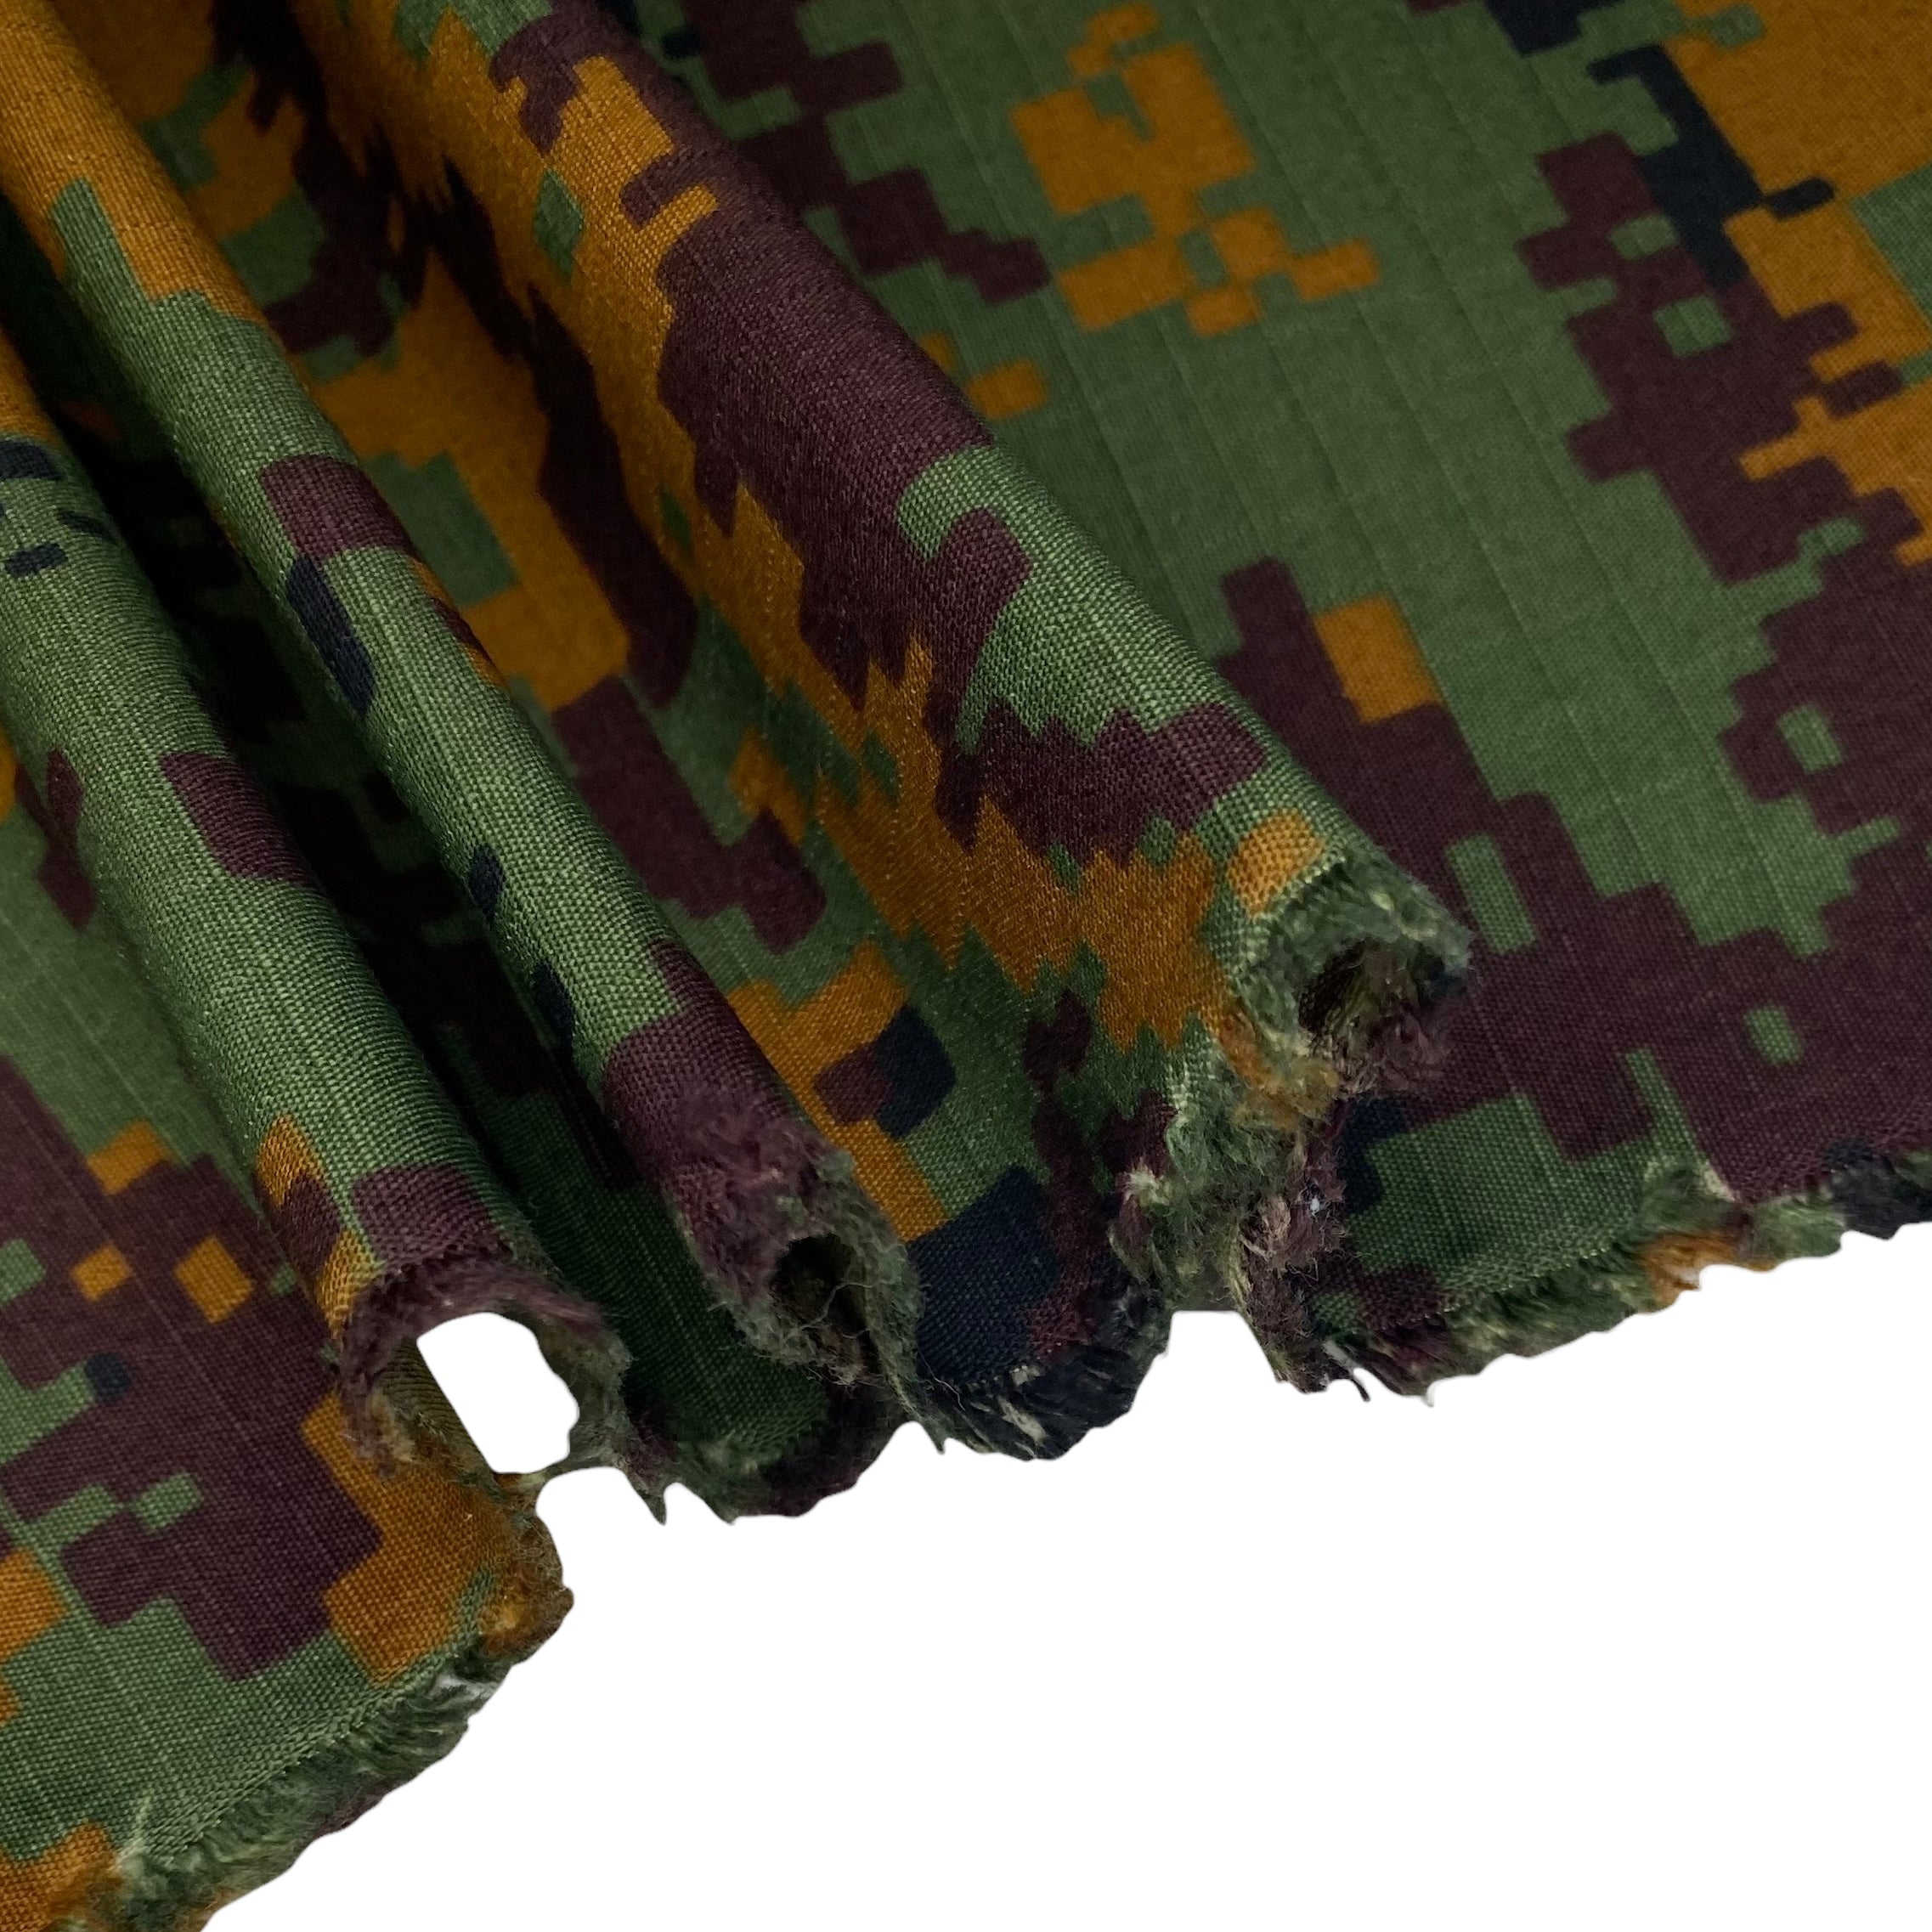 Printed Ripstop Cotton Canvas - Digital Camouflage